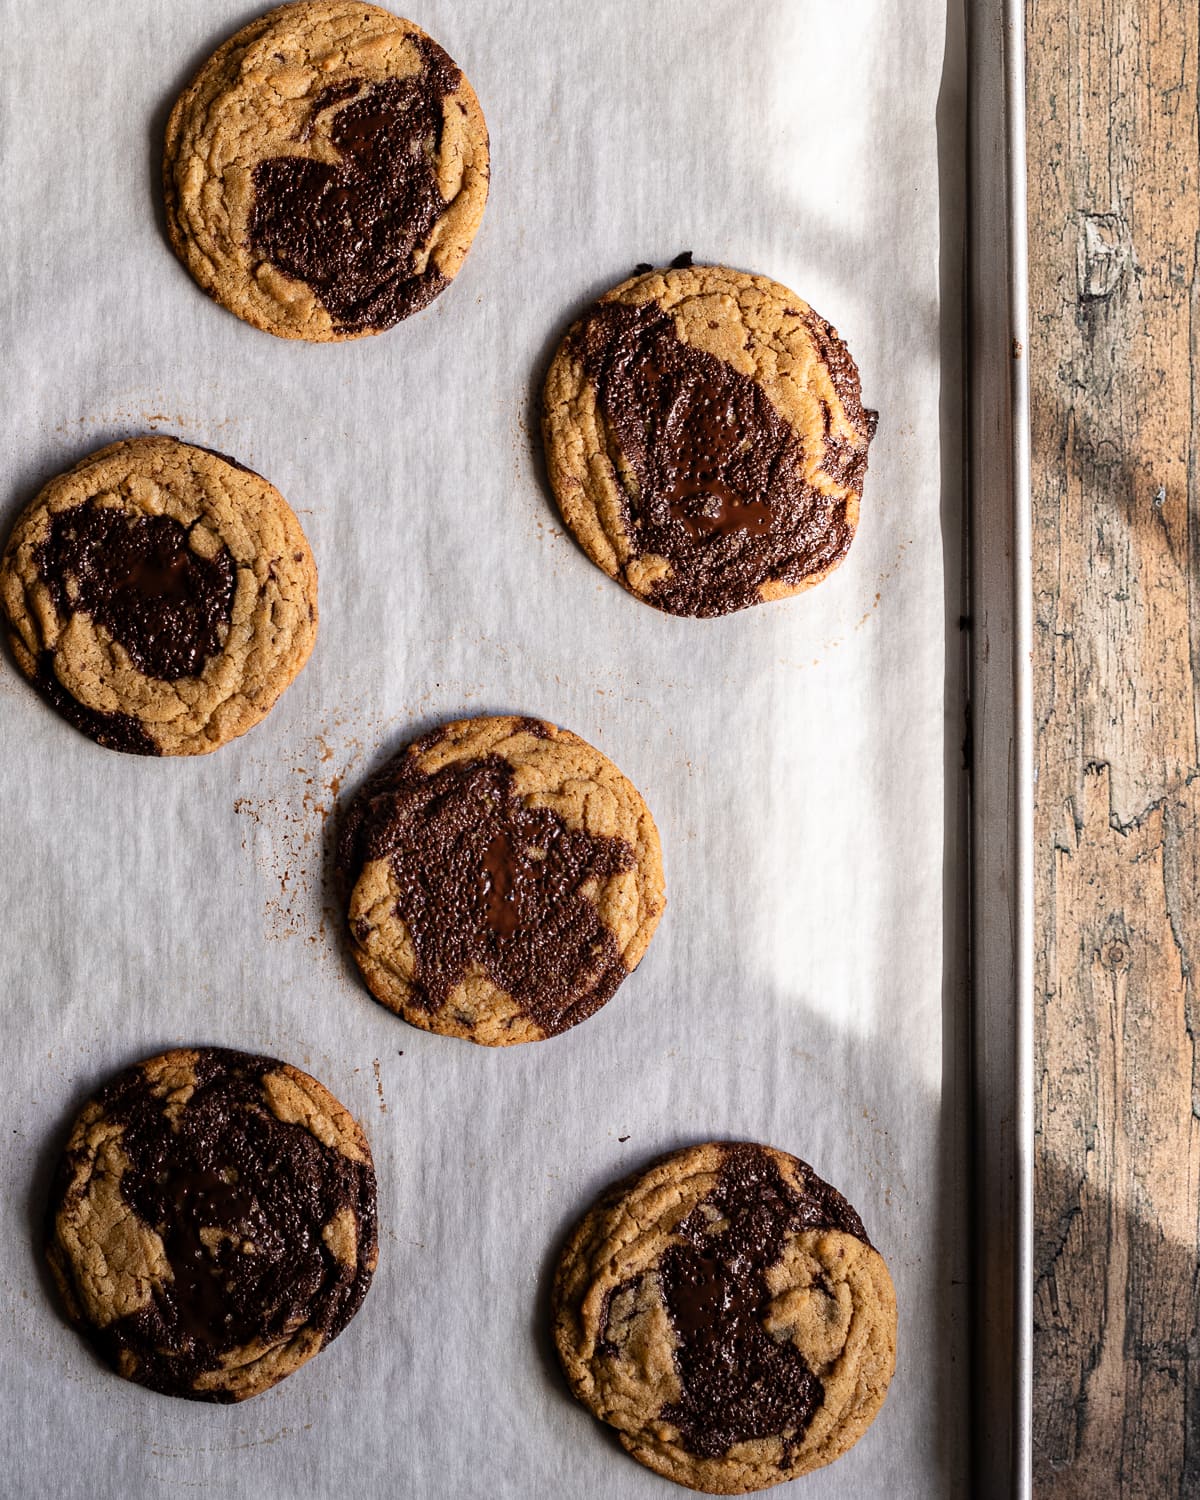 baked chocolate chip cookies on a parchment-lined baking sheet.